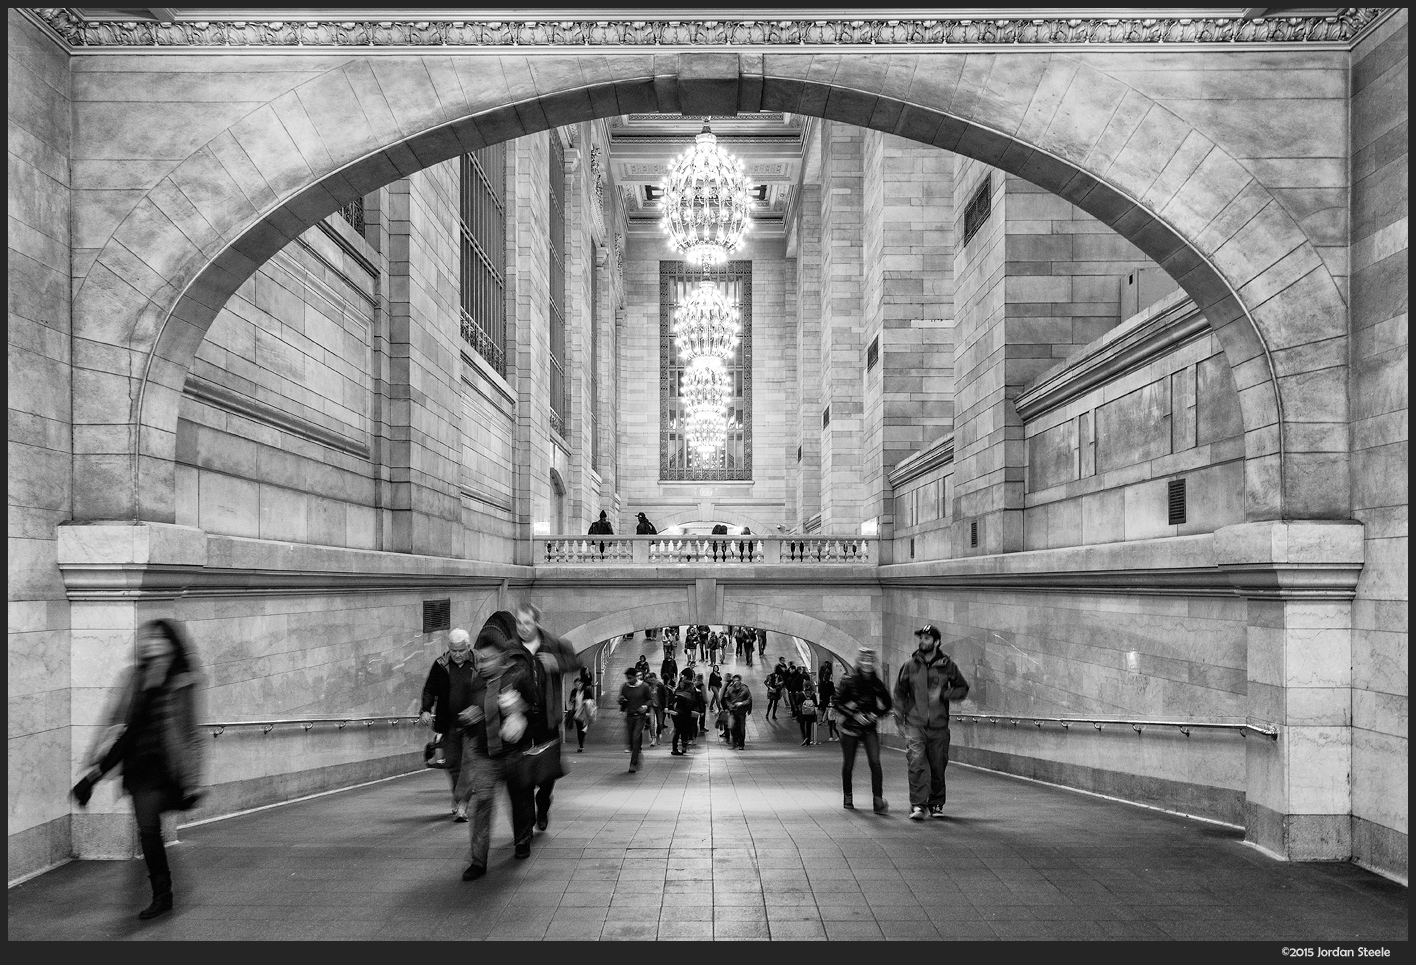 Grand Central Station - Sony A7 II with Zeiss FE 16-35mm f/4 @